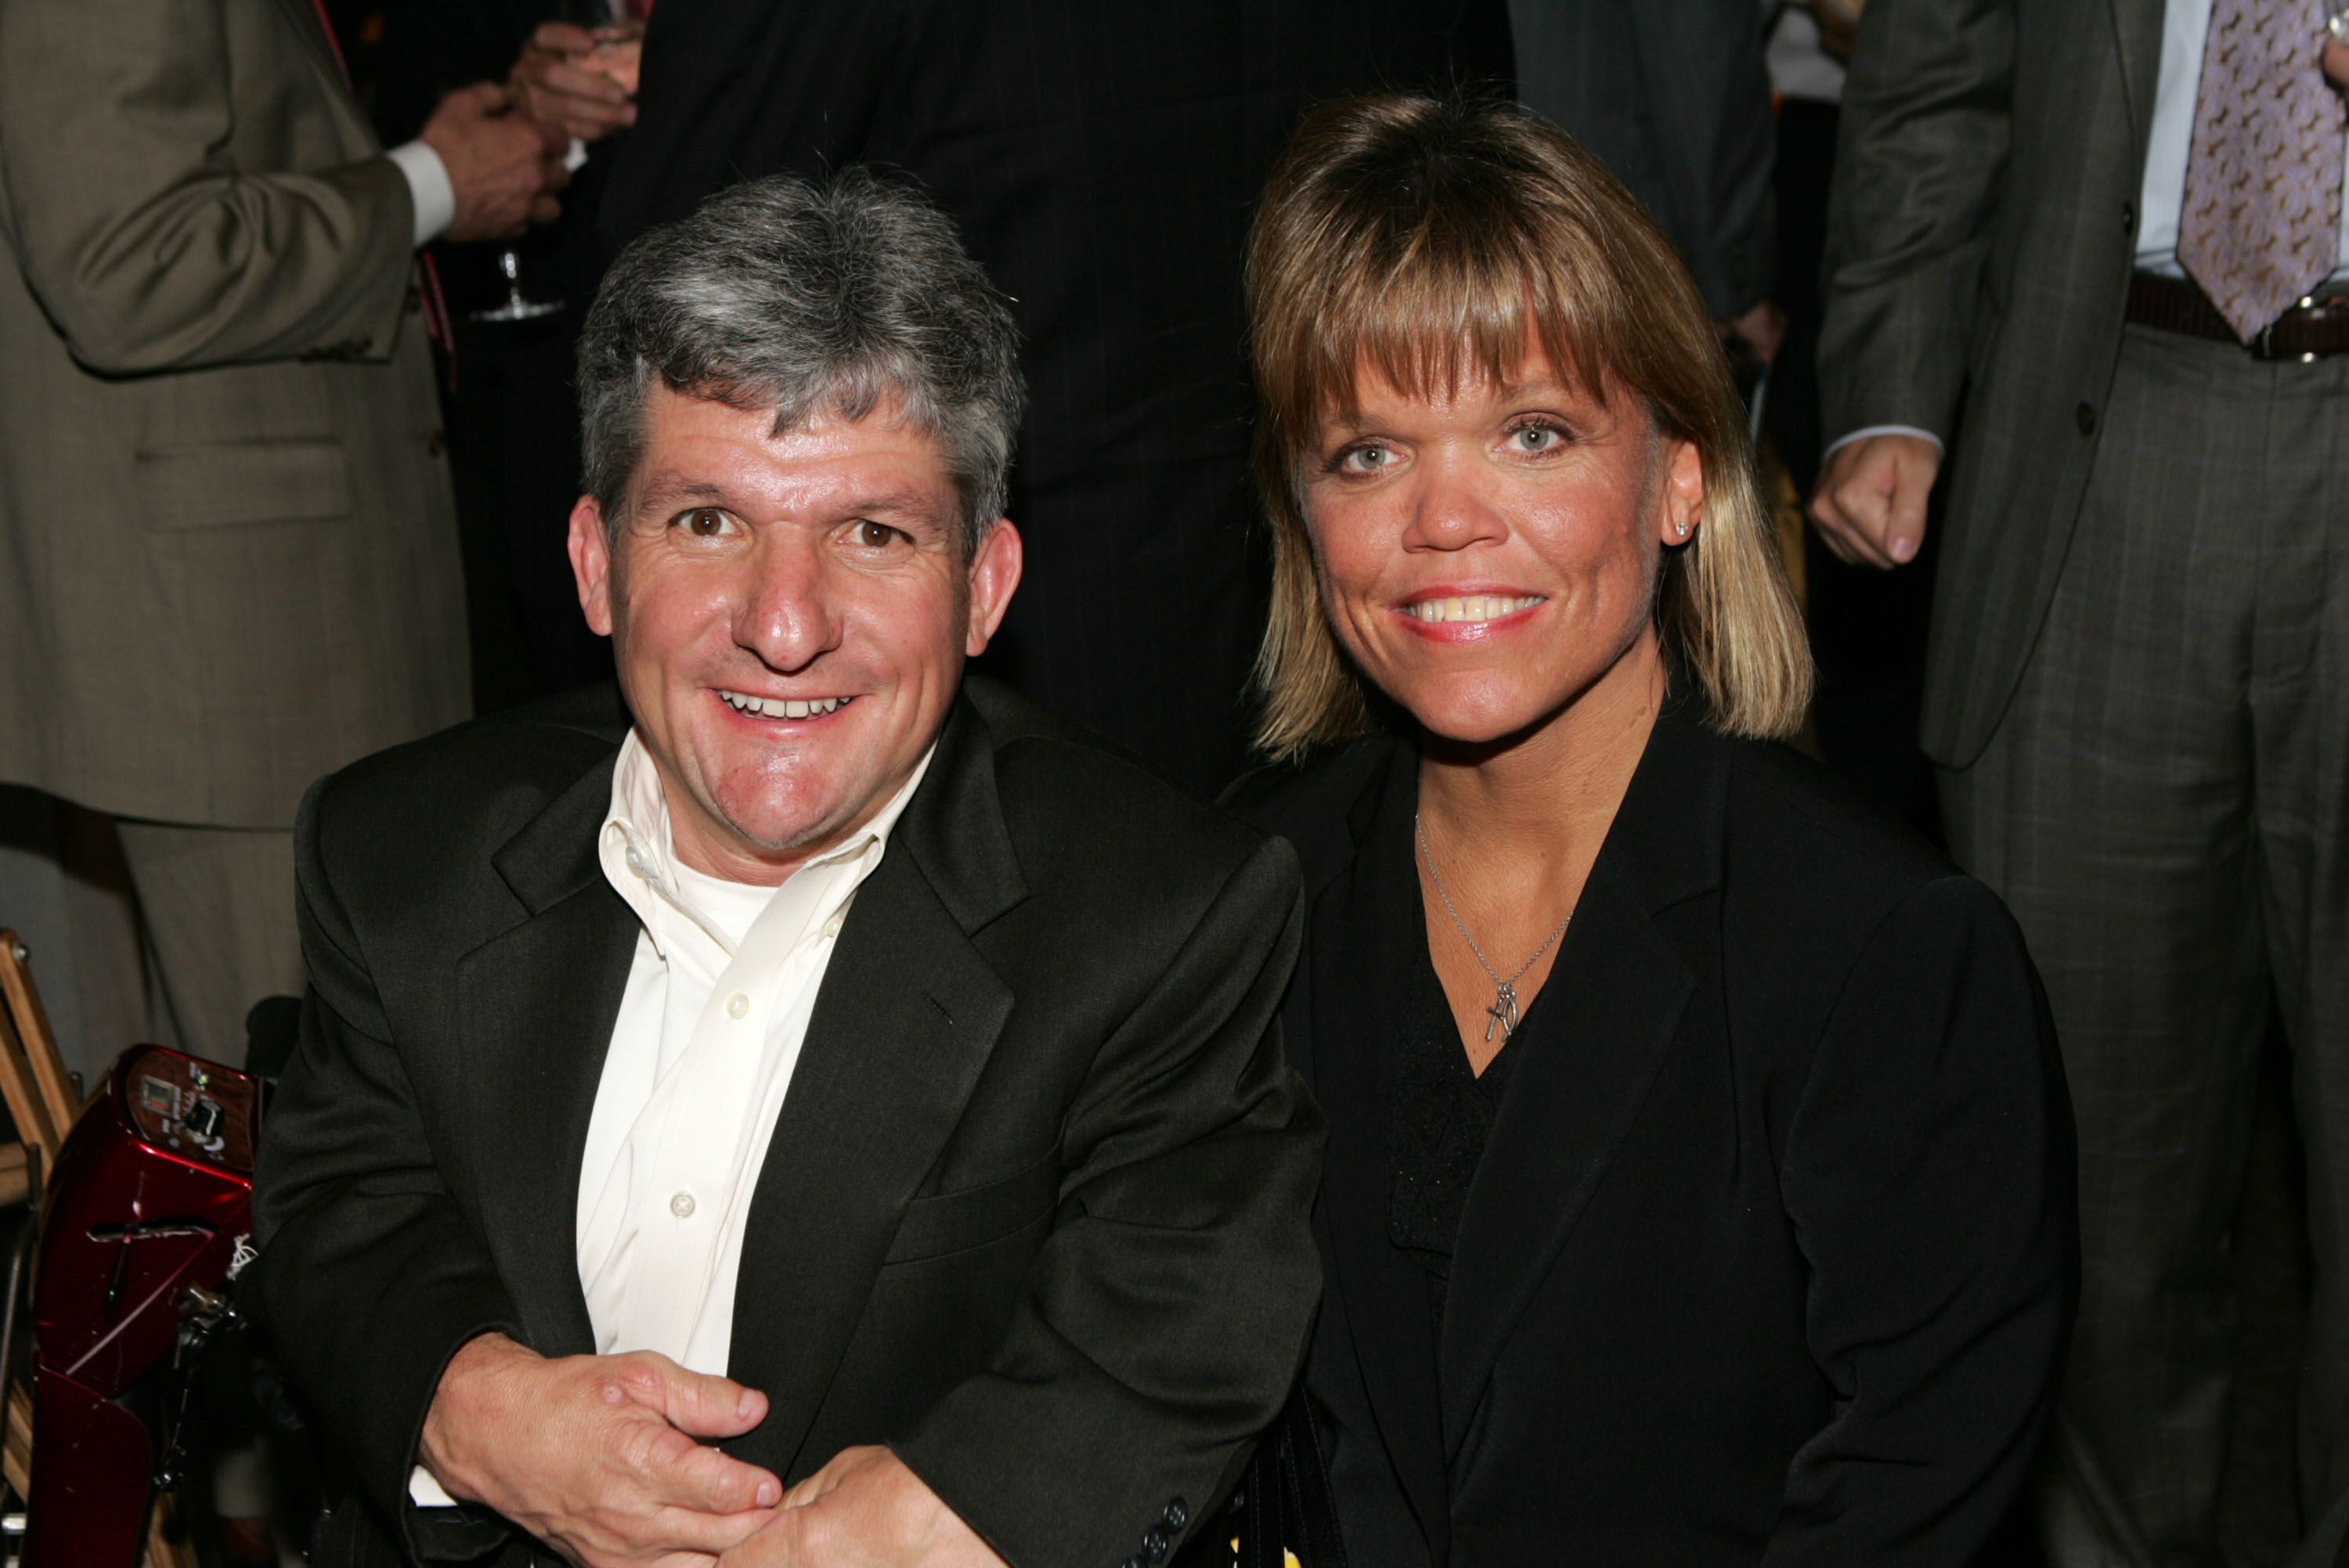 Matt and Amy Roloff attend the Discovery Upfront Presentation. | Source: Getty Images